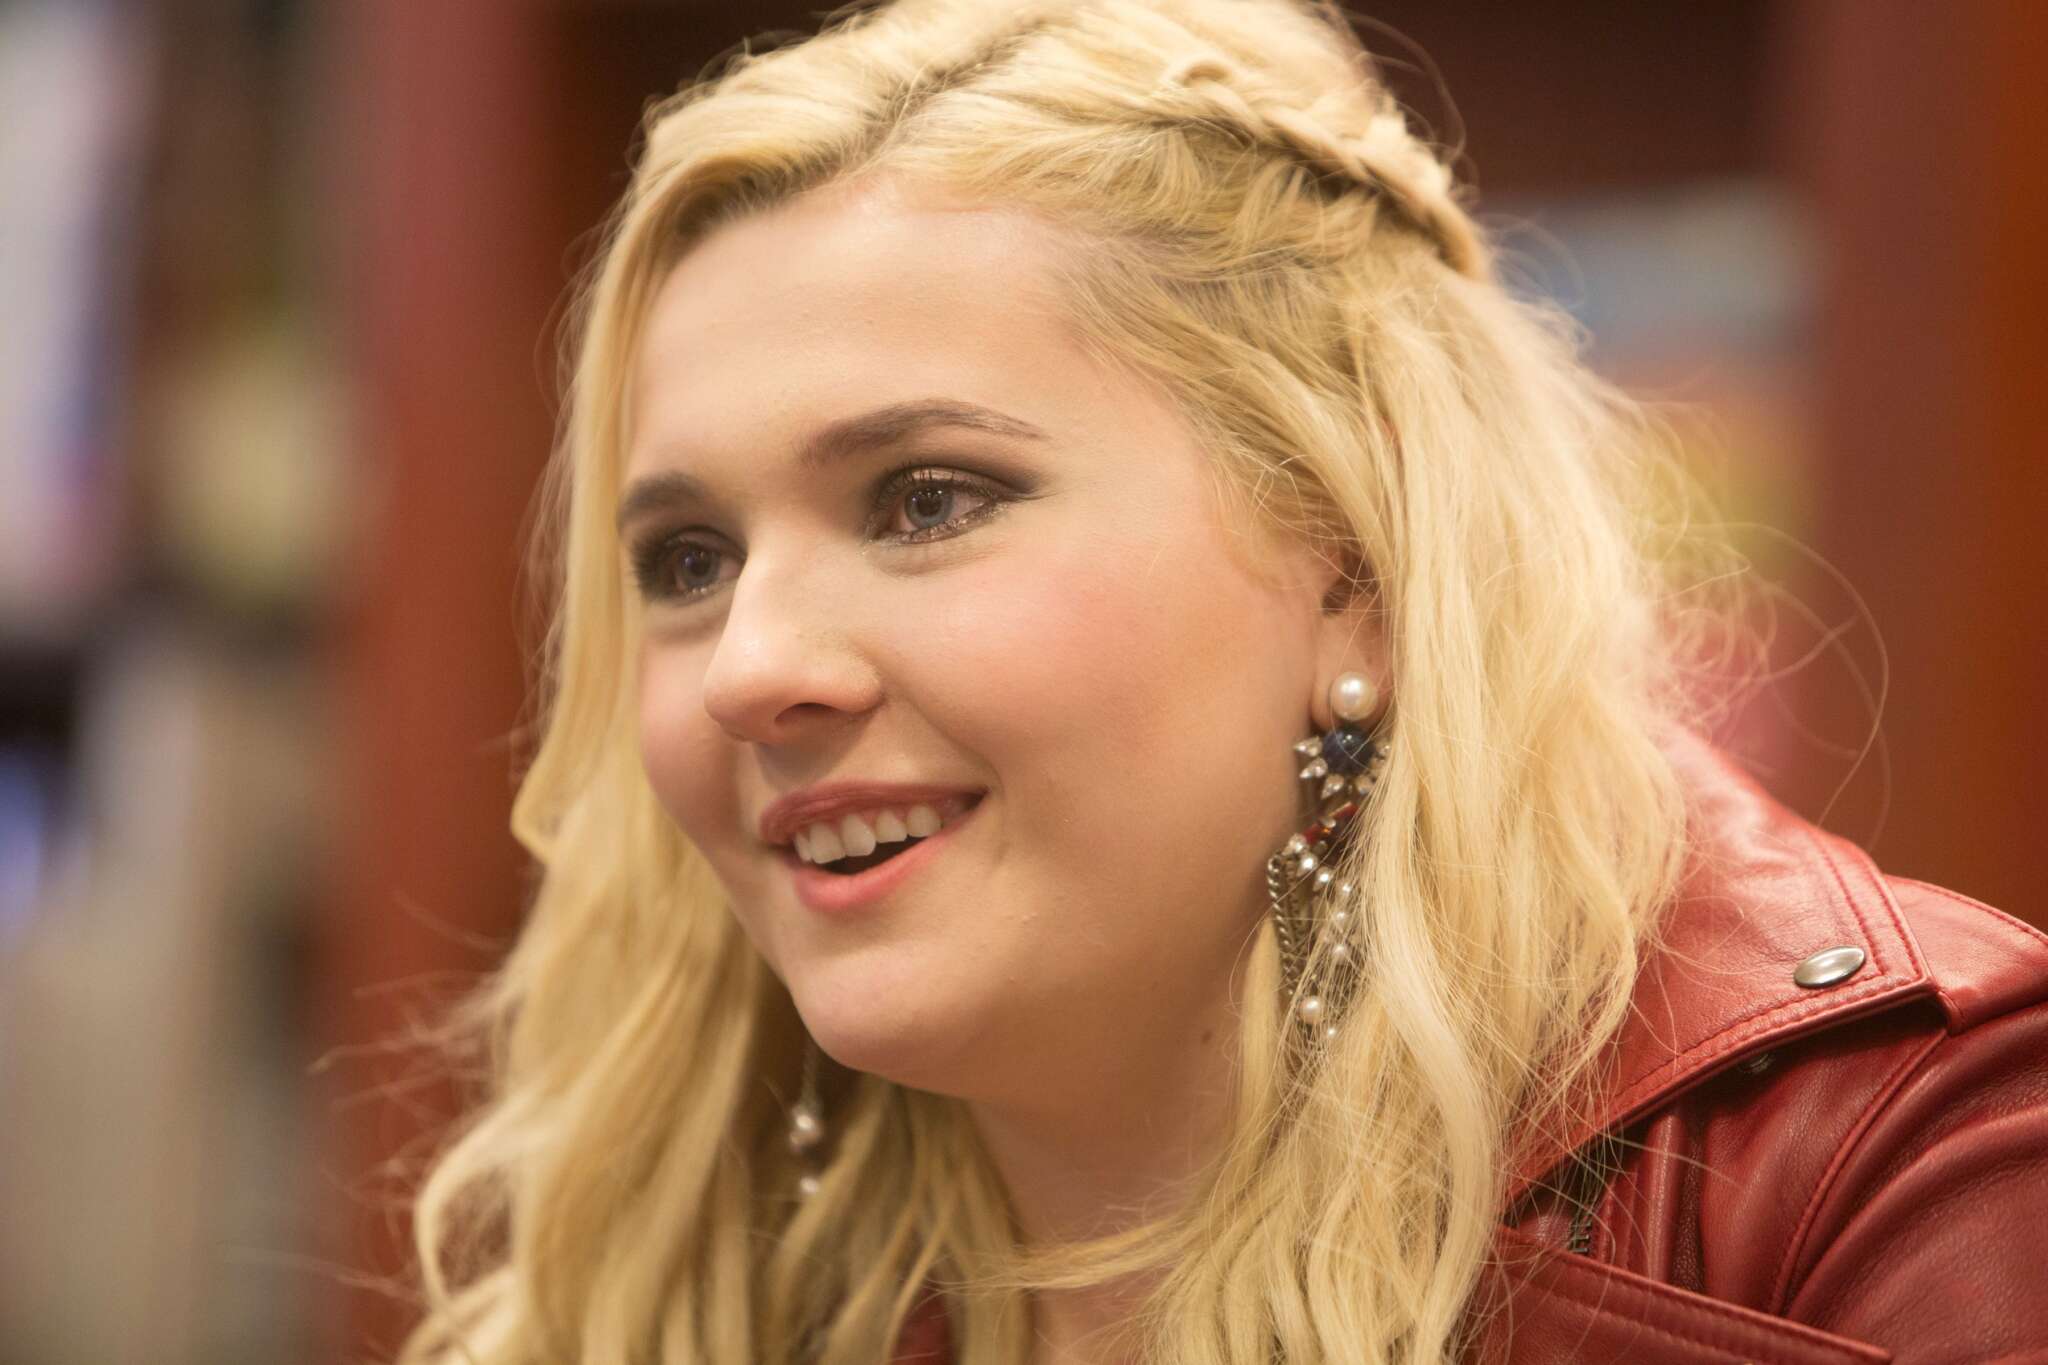 Abigail Breslin Claps Back At ‘Disgusting’ COVID-19 Comment While Her Father Is Struggling To Survive!